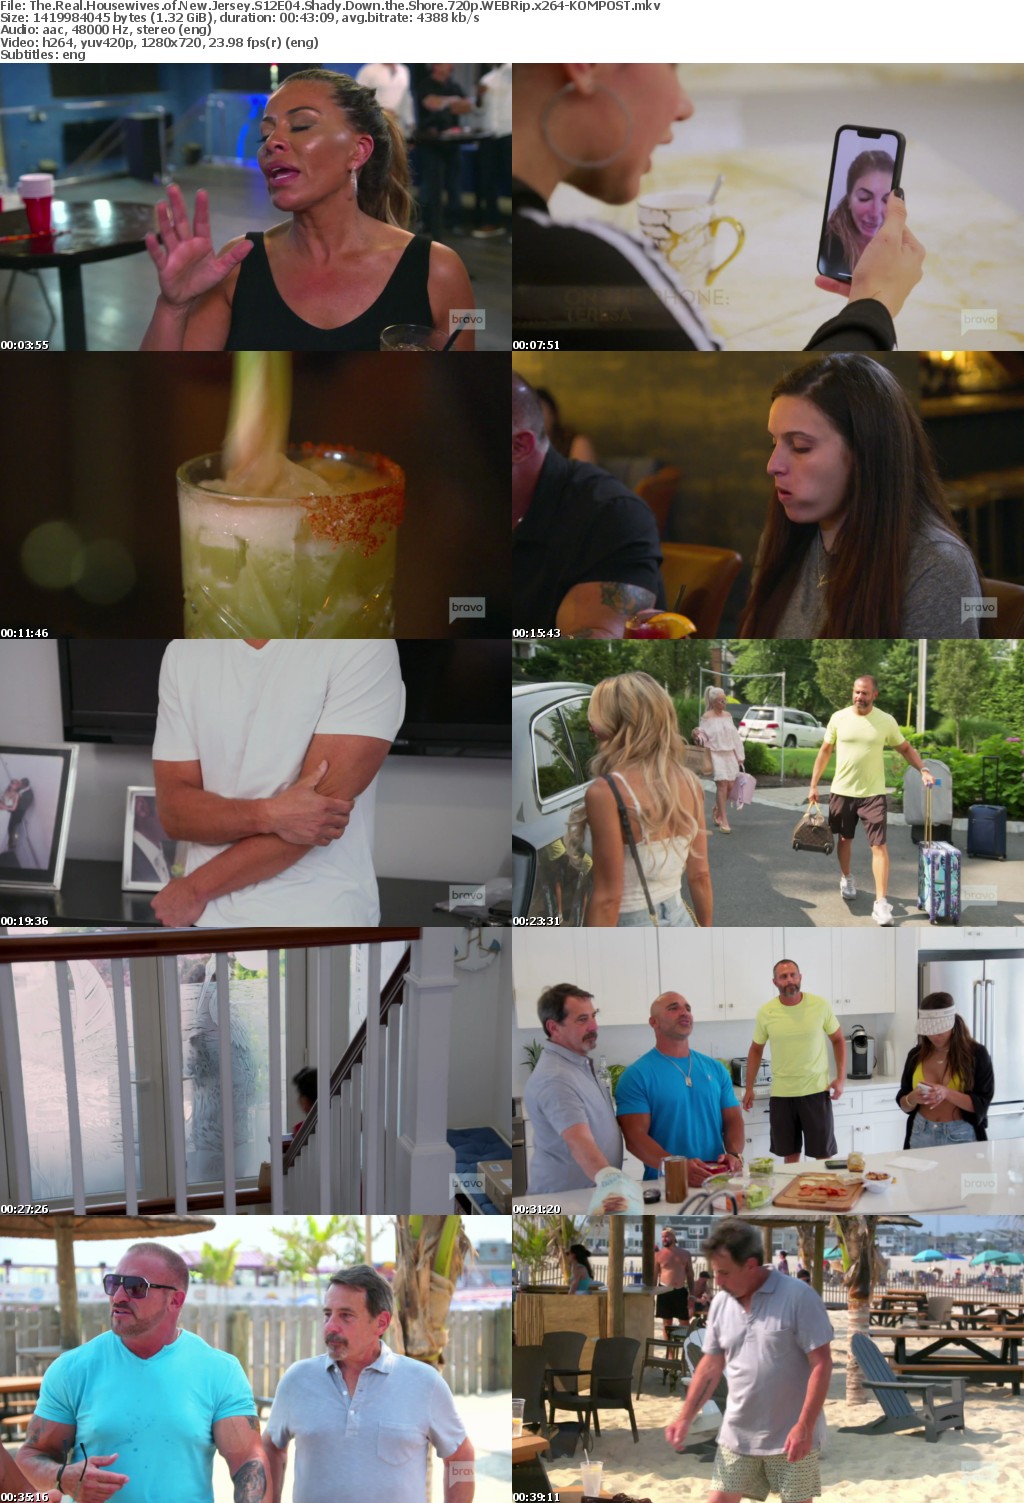 The Real Housewives of New Jersey S12E04 Shady Down the Shore 720p WEBRip x264-KOMPOST